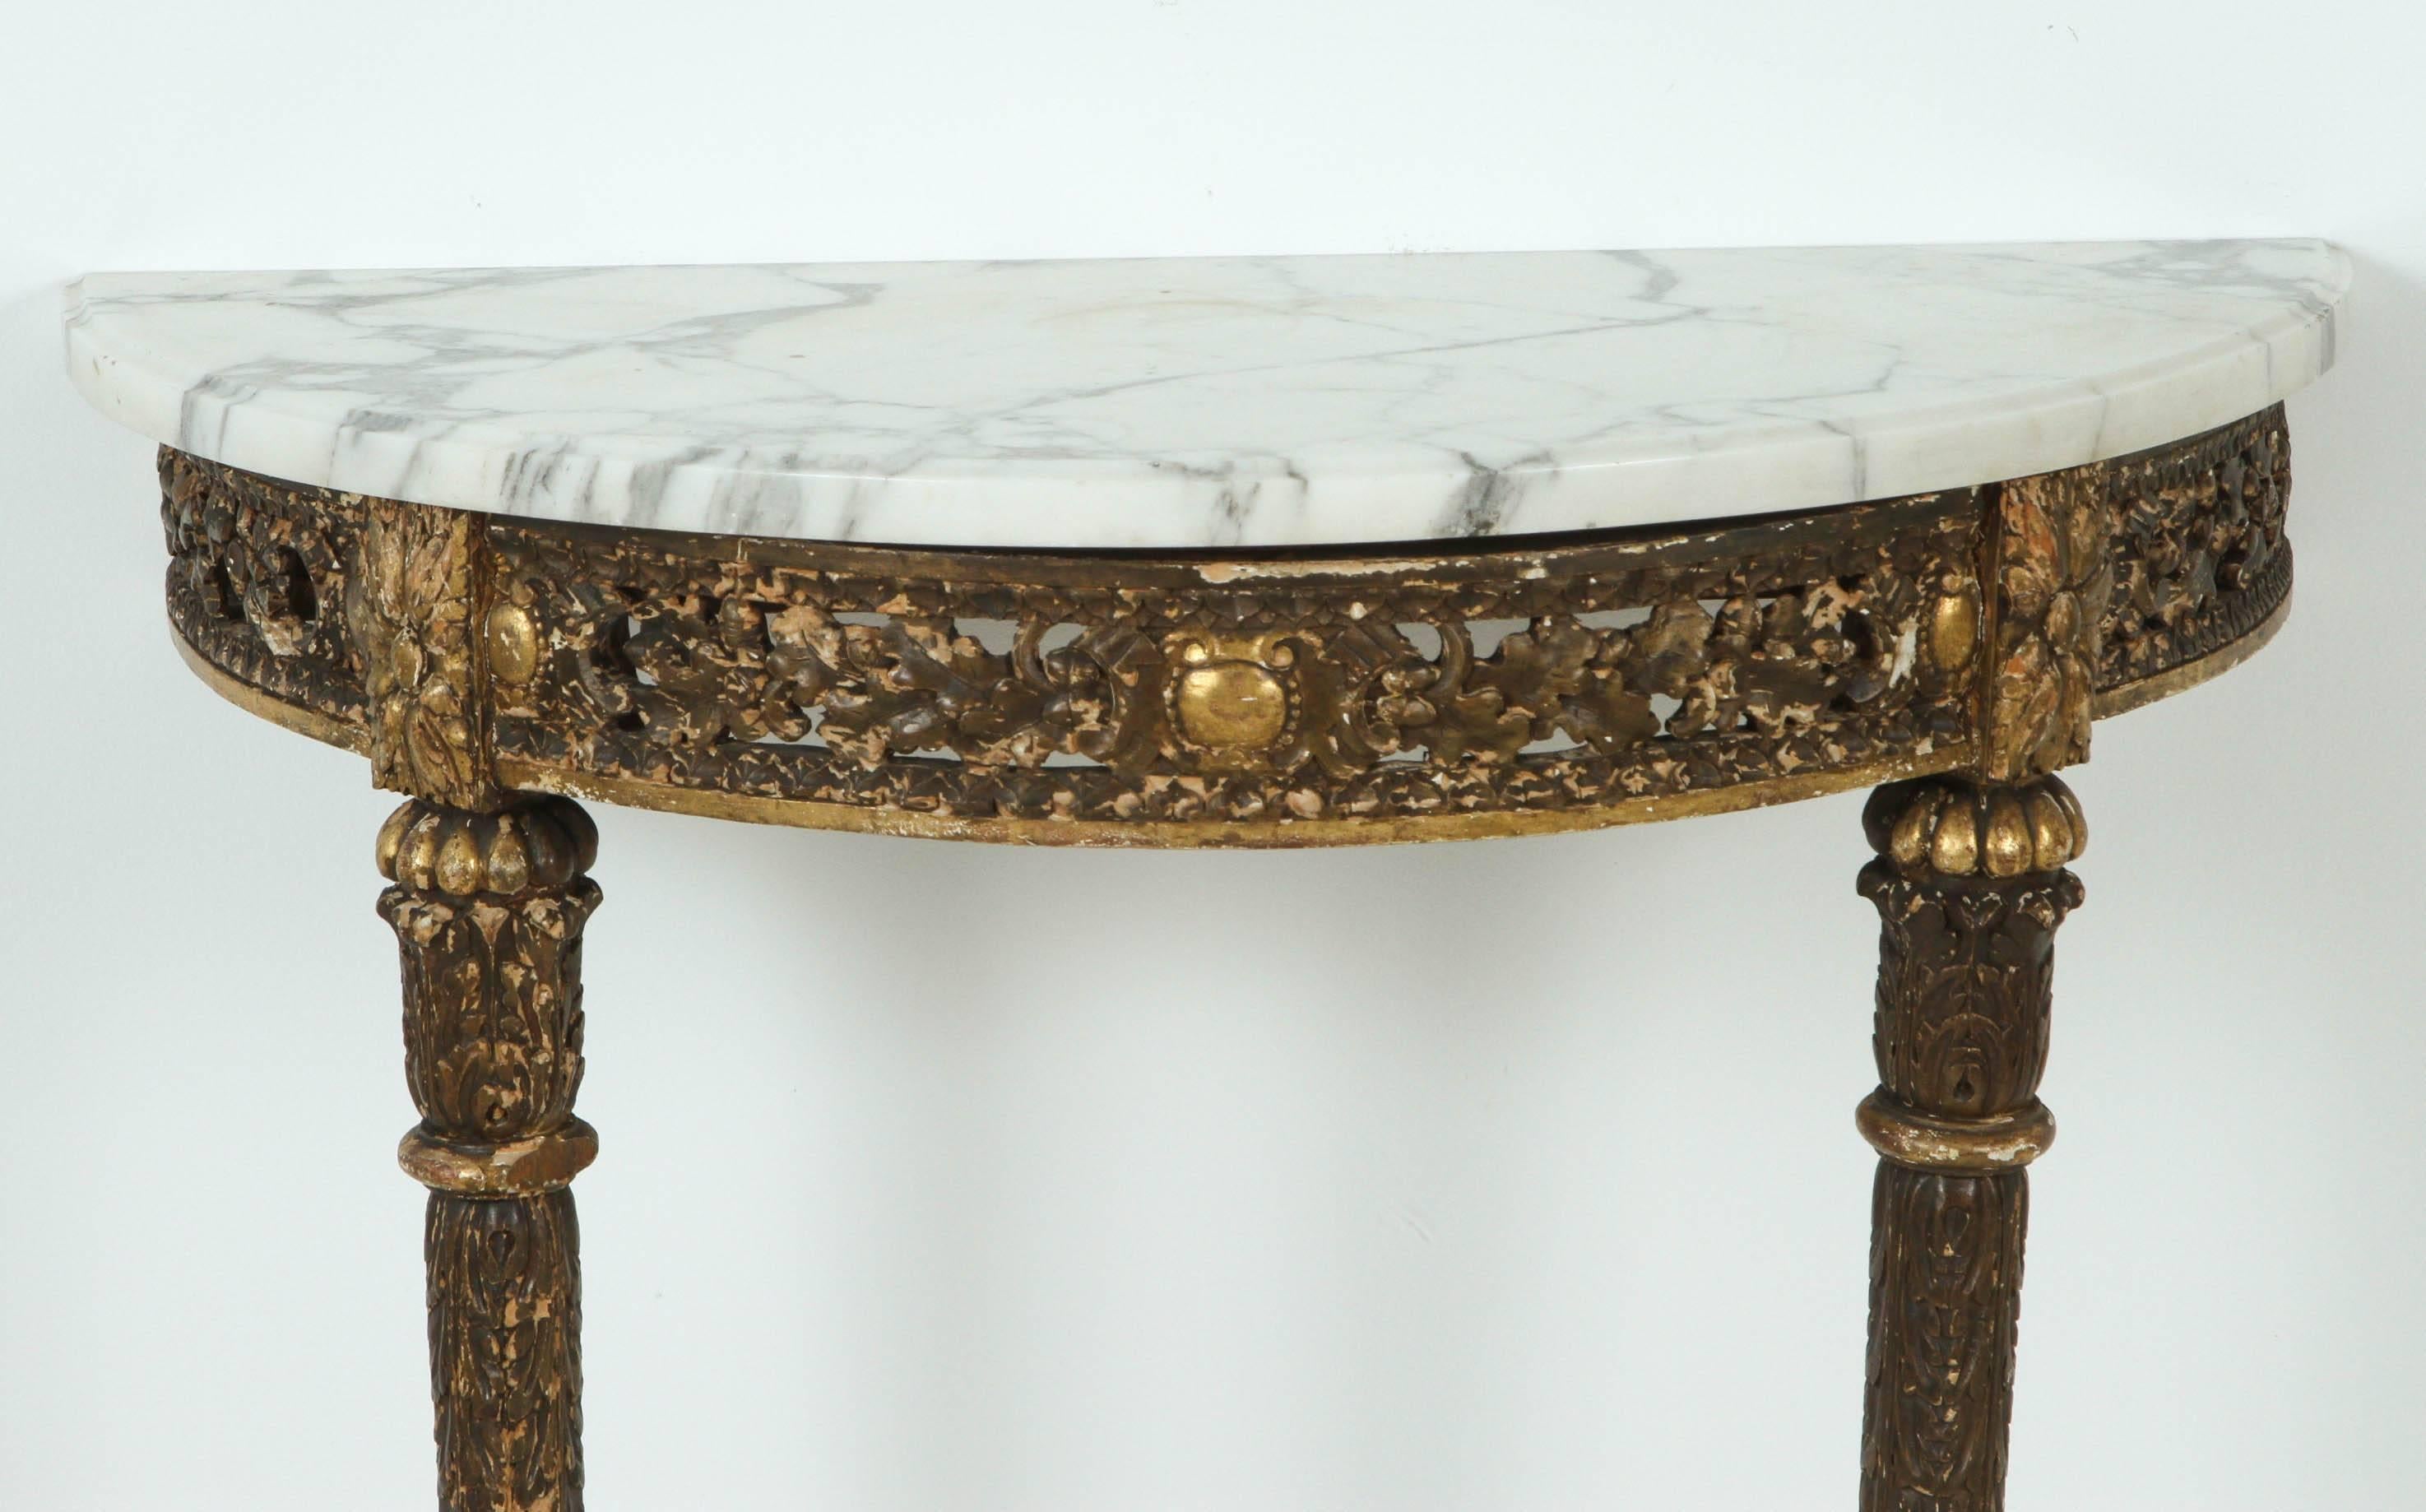 Charming petite demilune console table with white Carrara marble top.